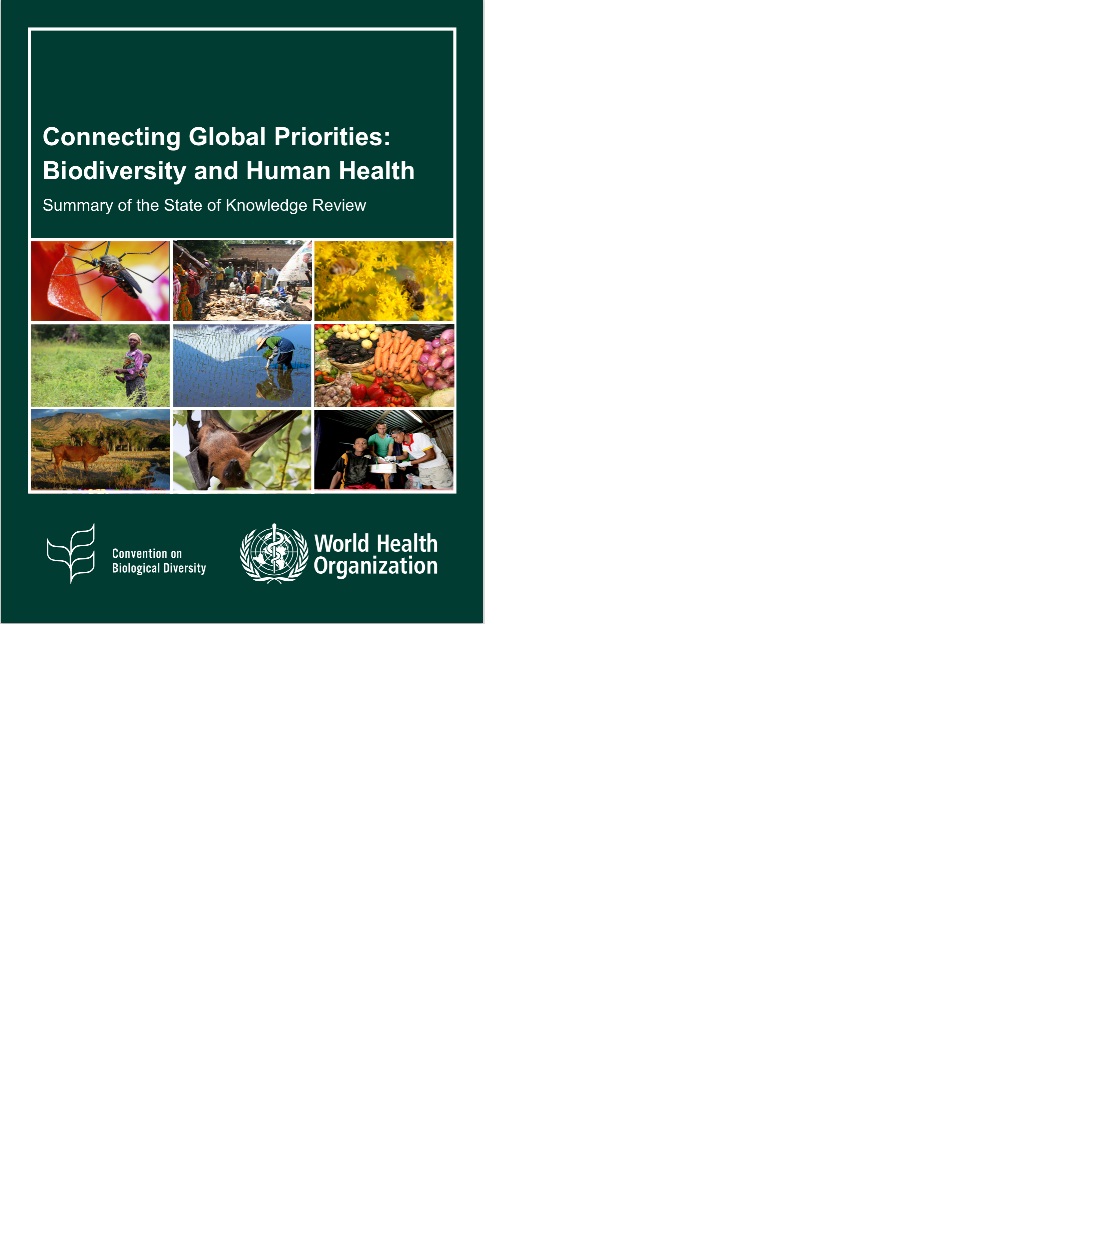 Connecting global priorities: biodiversity and human health - summary of the state of knowledge review